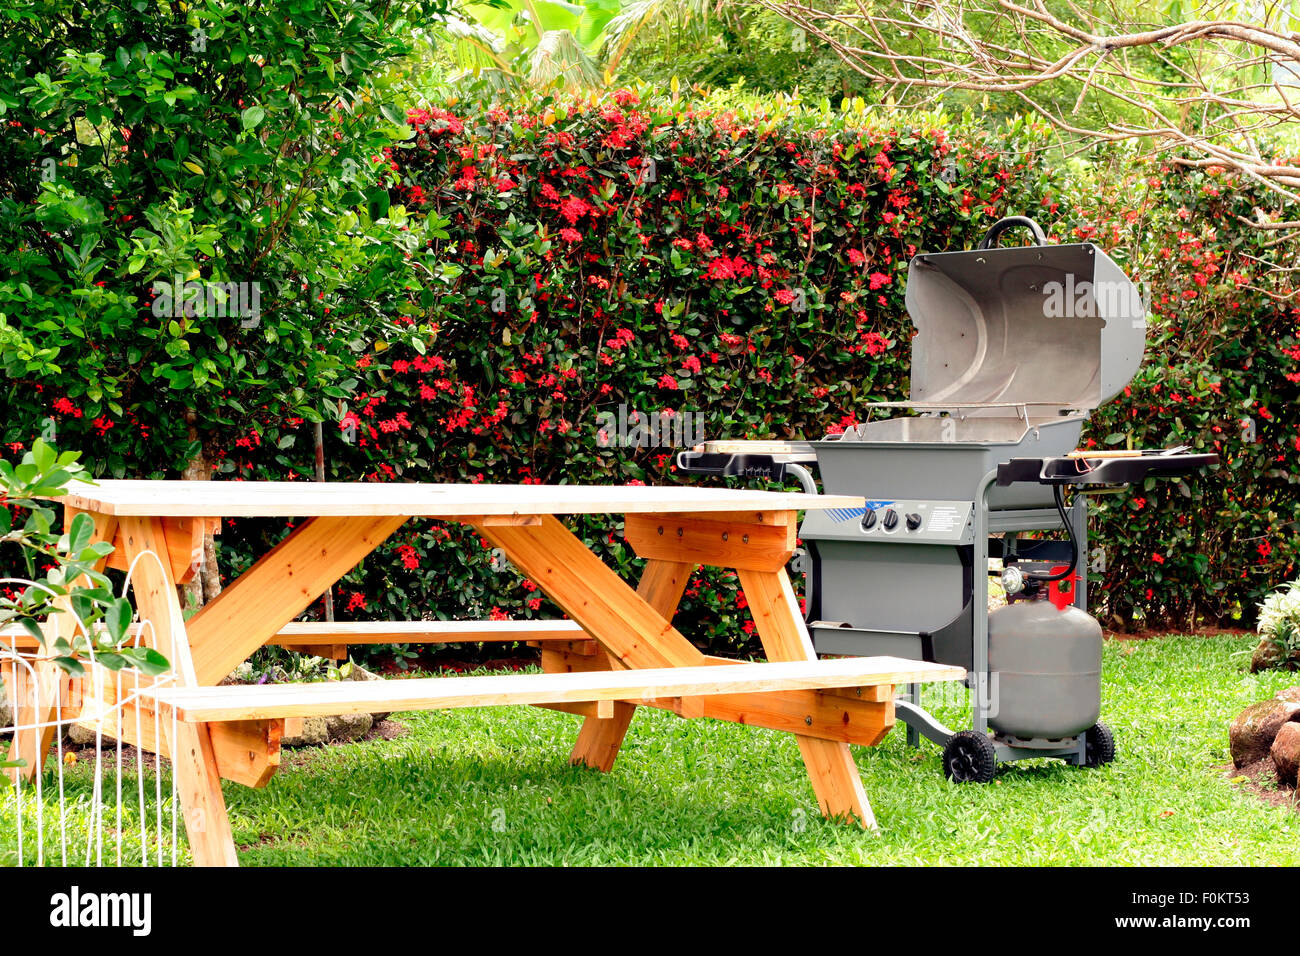 Picnic table and grill  set up for a family barbecue outdoors Stock Photo